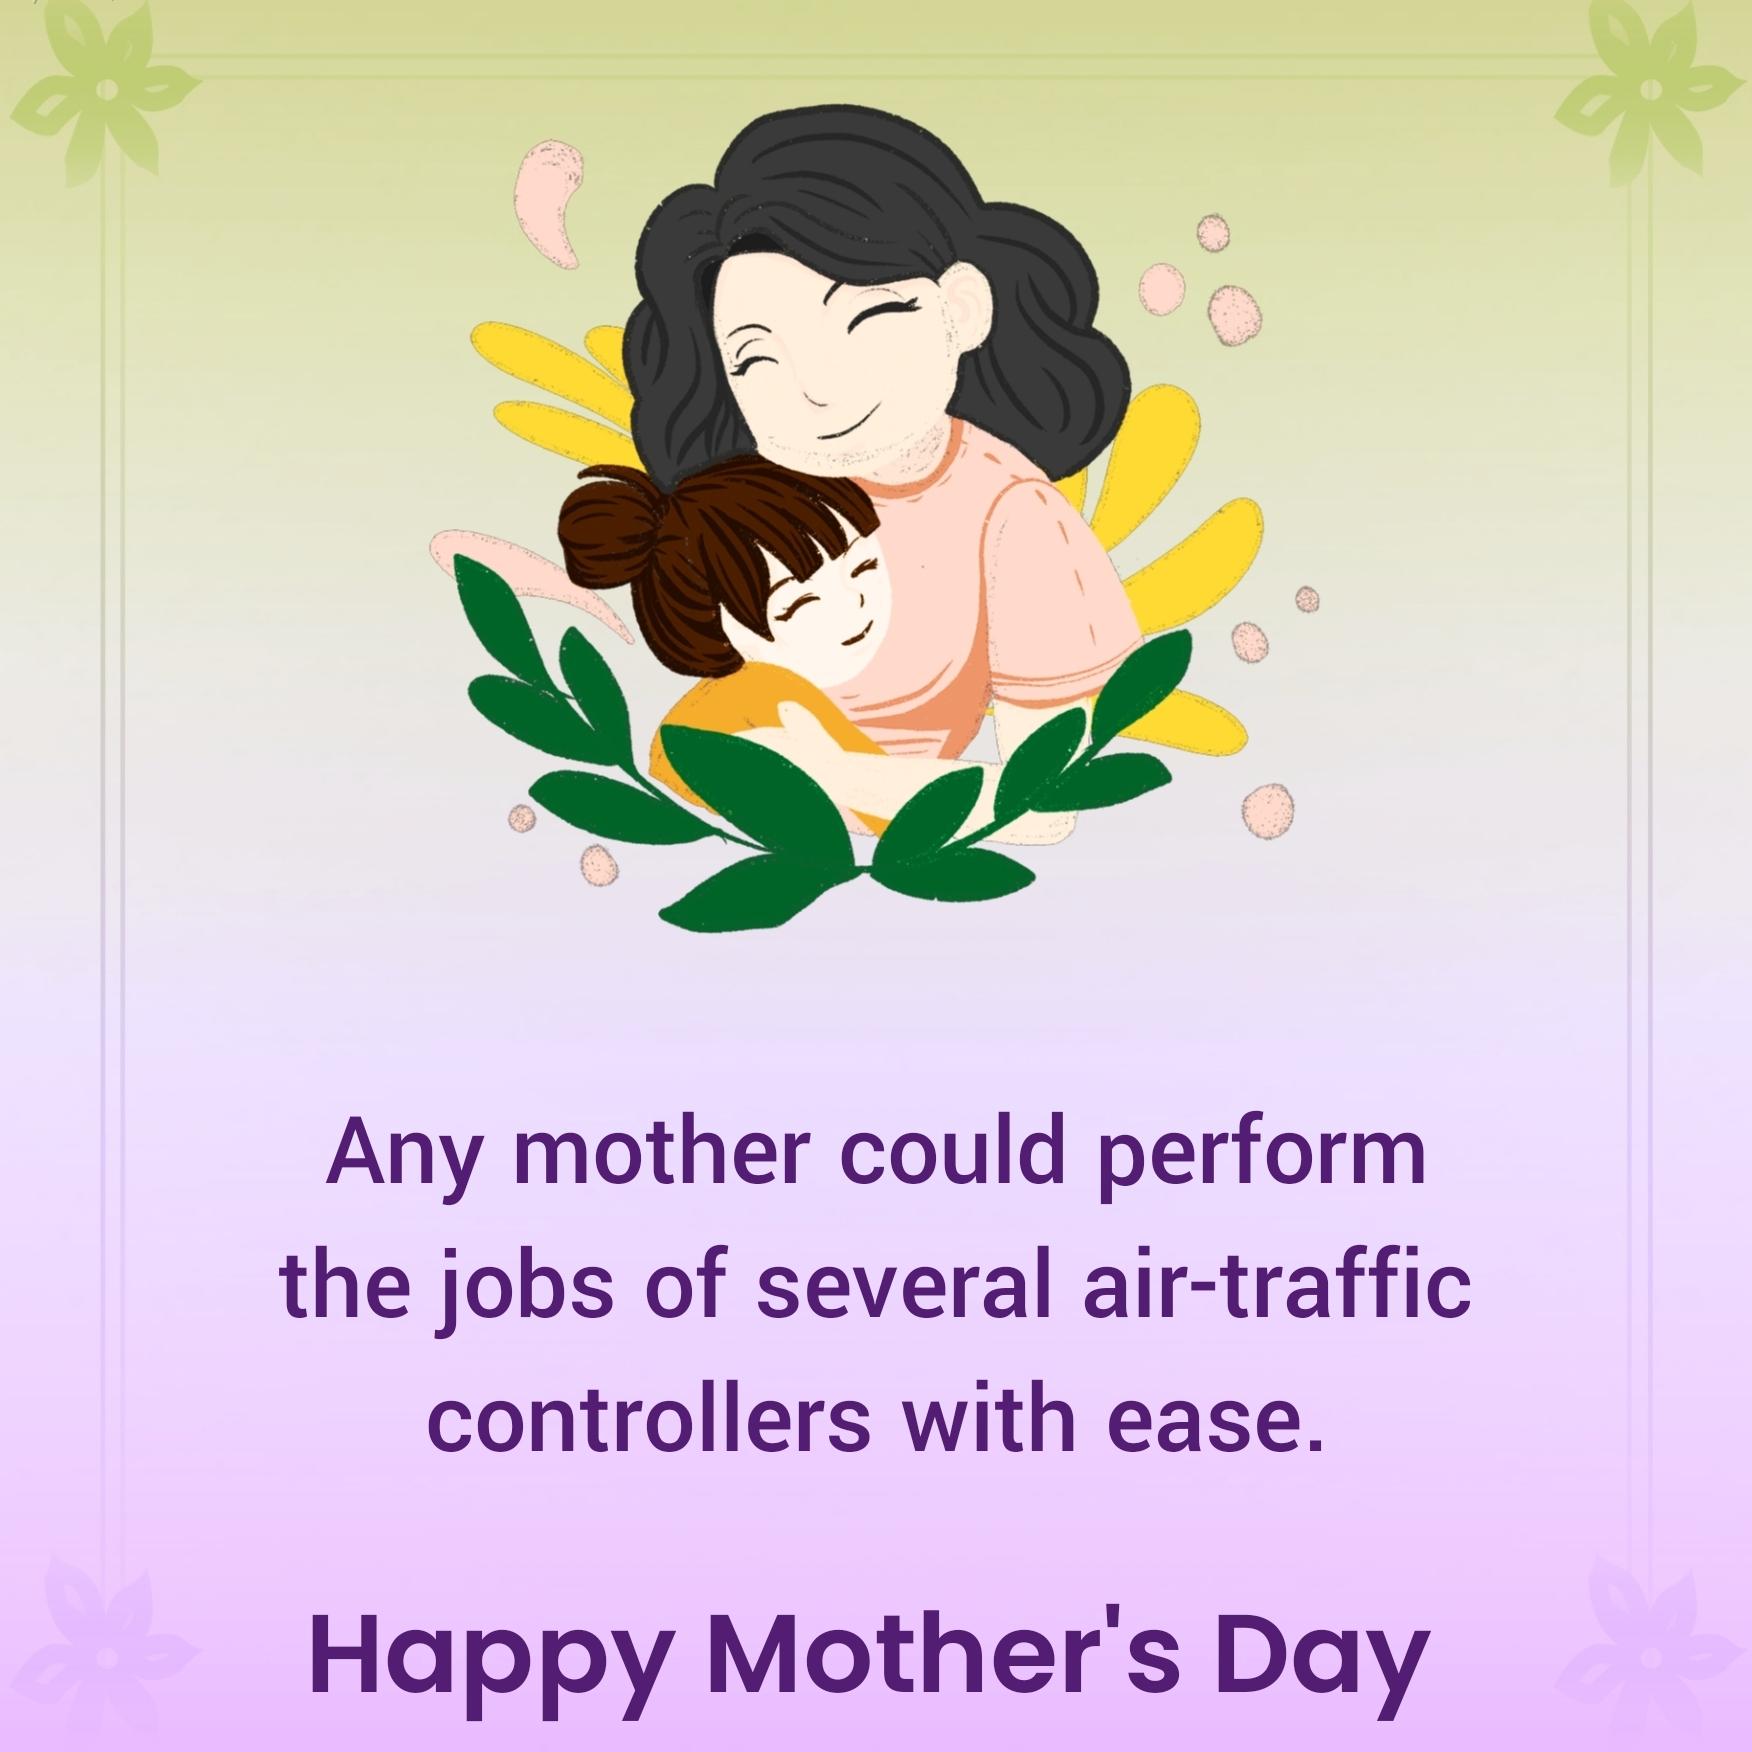 Any mother could perform the jobs of several air-traffic controllers